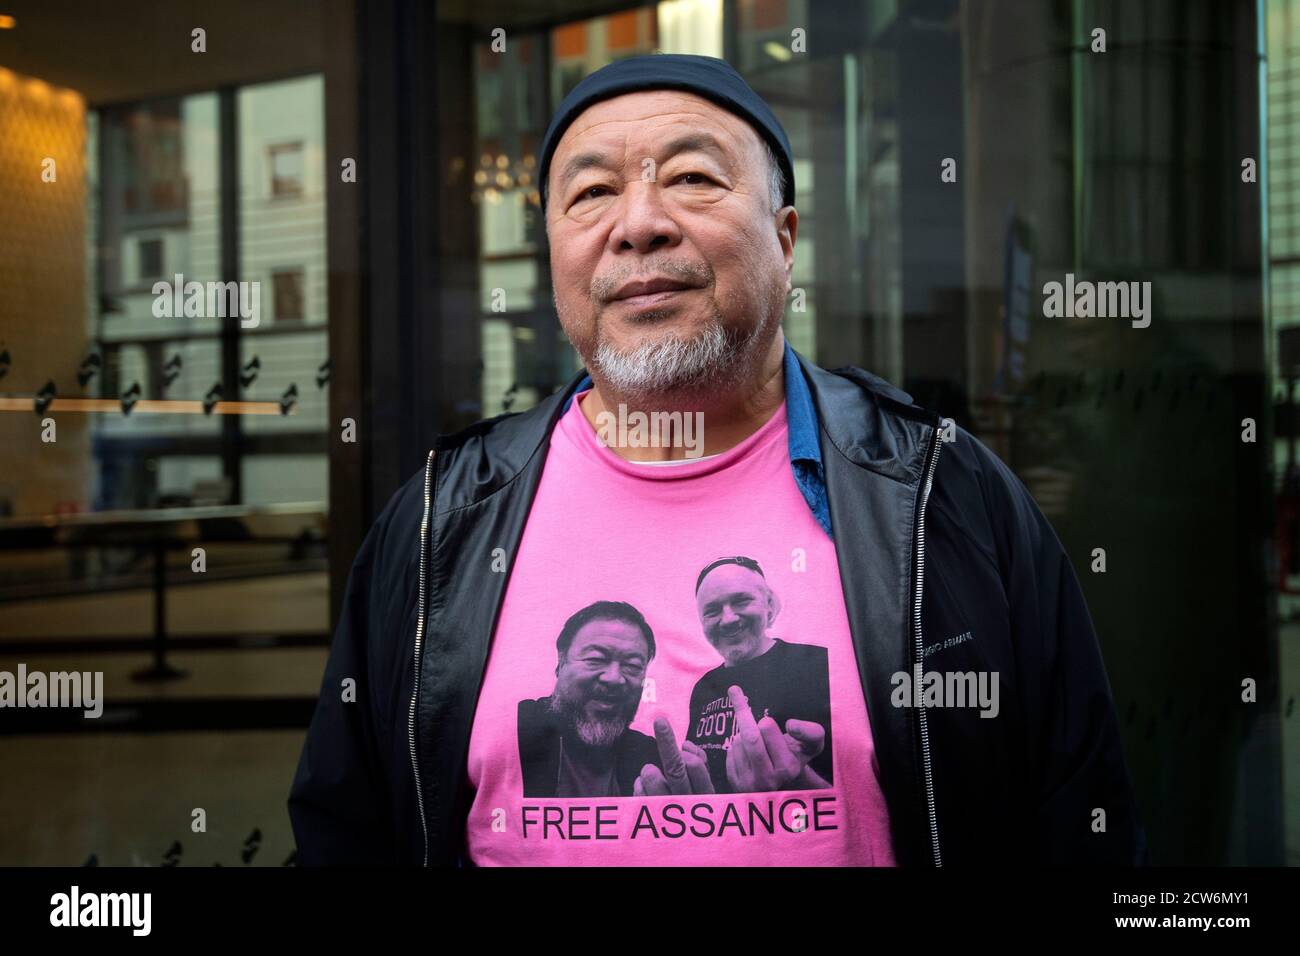 https://c8.alamy.com/comp/2CW6MY1/chinese-contemporary-artist-and-activist-ai-weiwei-after-a-silent-protest-outside-the-old-bailey-in-london-in-support-of-julian-assange-the-wikileaks-founder-is-fighting-extradition-to-the-us-on-charges-relating-to-leaks-of-classified-documents-allegedly-exposing-war-crimes-and-abuse-2CW6MY1.jpg